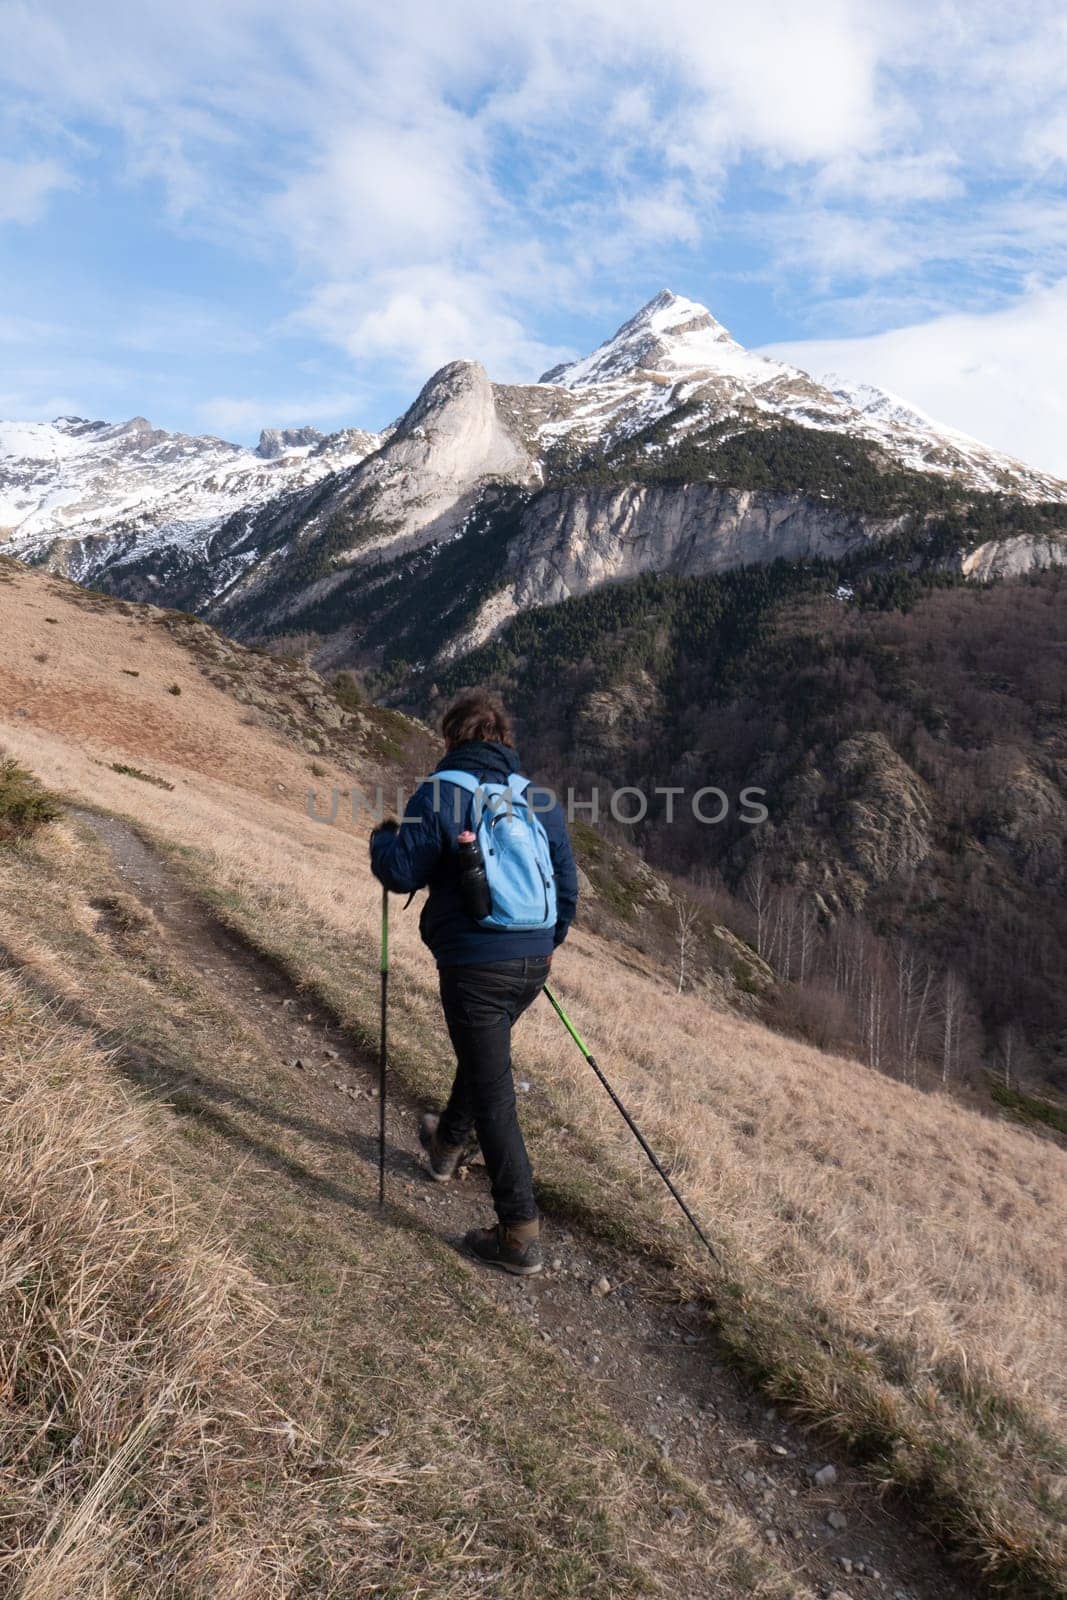 Hiker walking on the path in Pyrenees mountains near Gavarnie by FreeProd